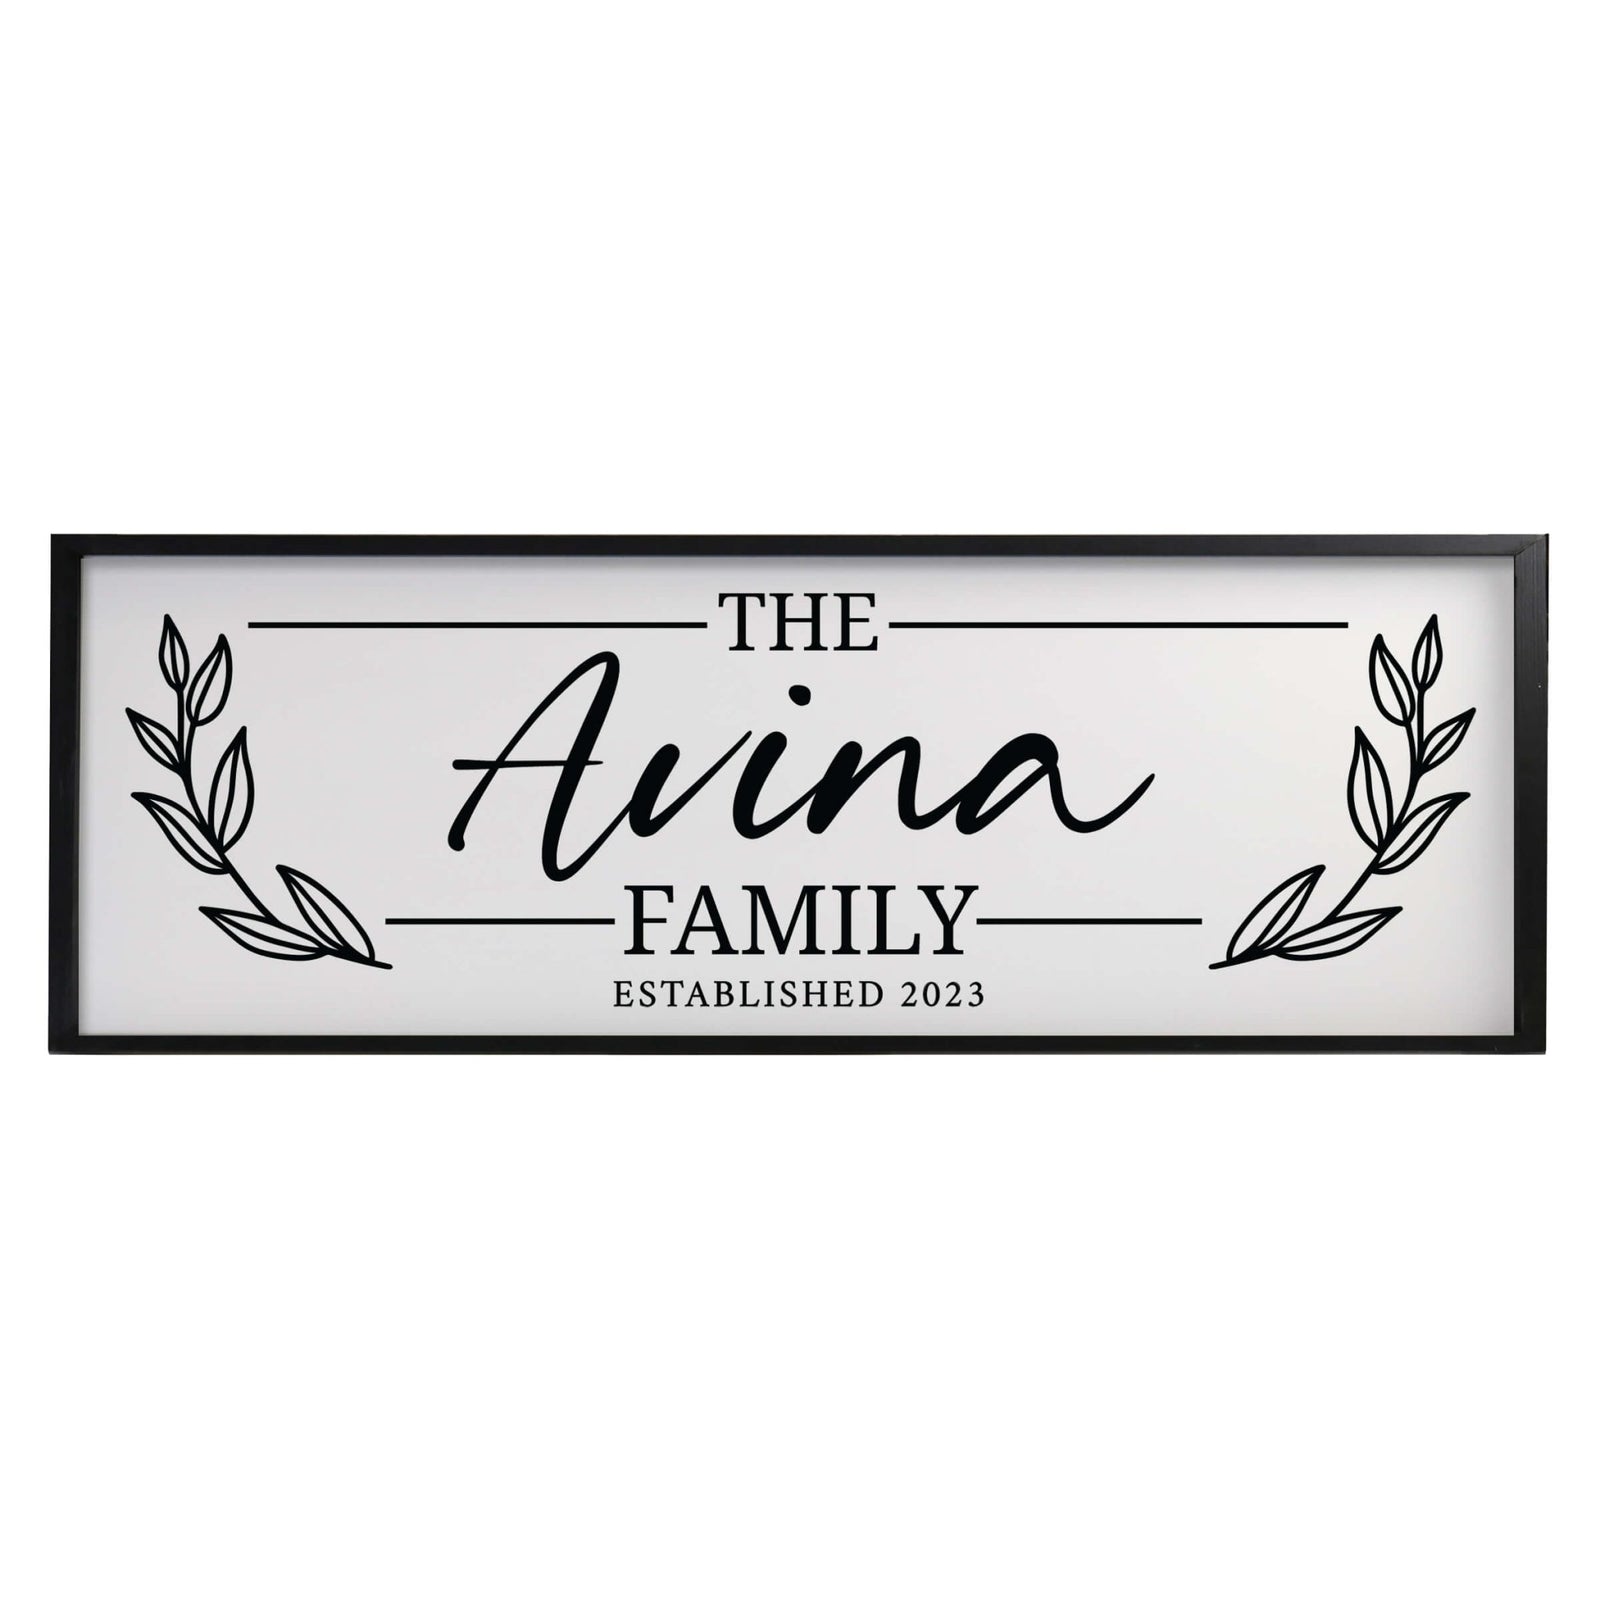 Personalized Family Wall Hanging Décor Framed Shadow Box For Home Décor - The Avina Family V2 - LifeSong Milestones